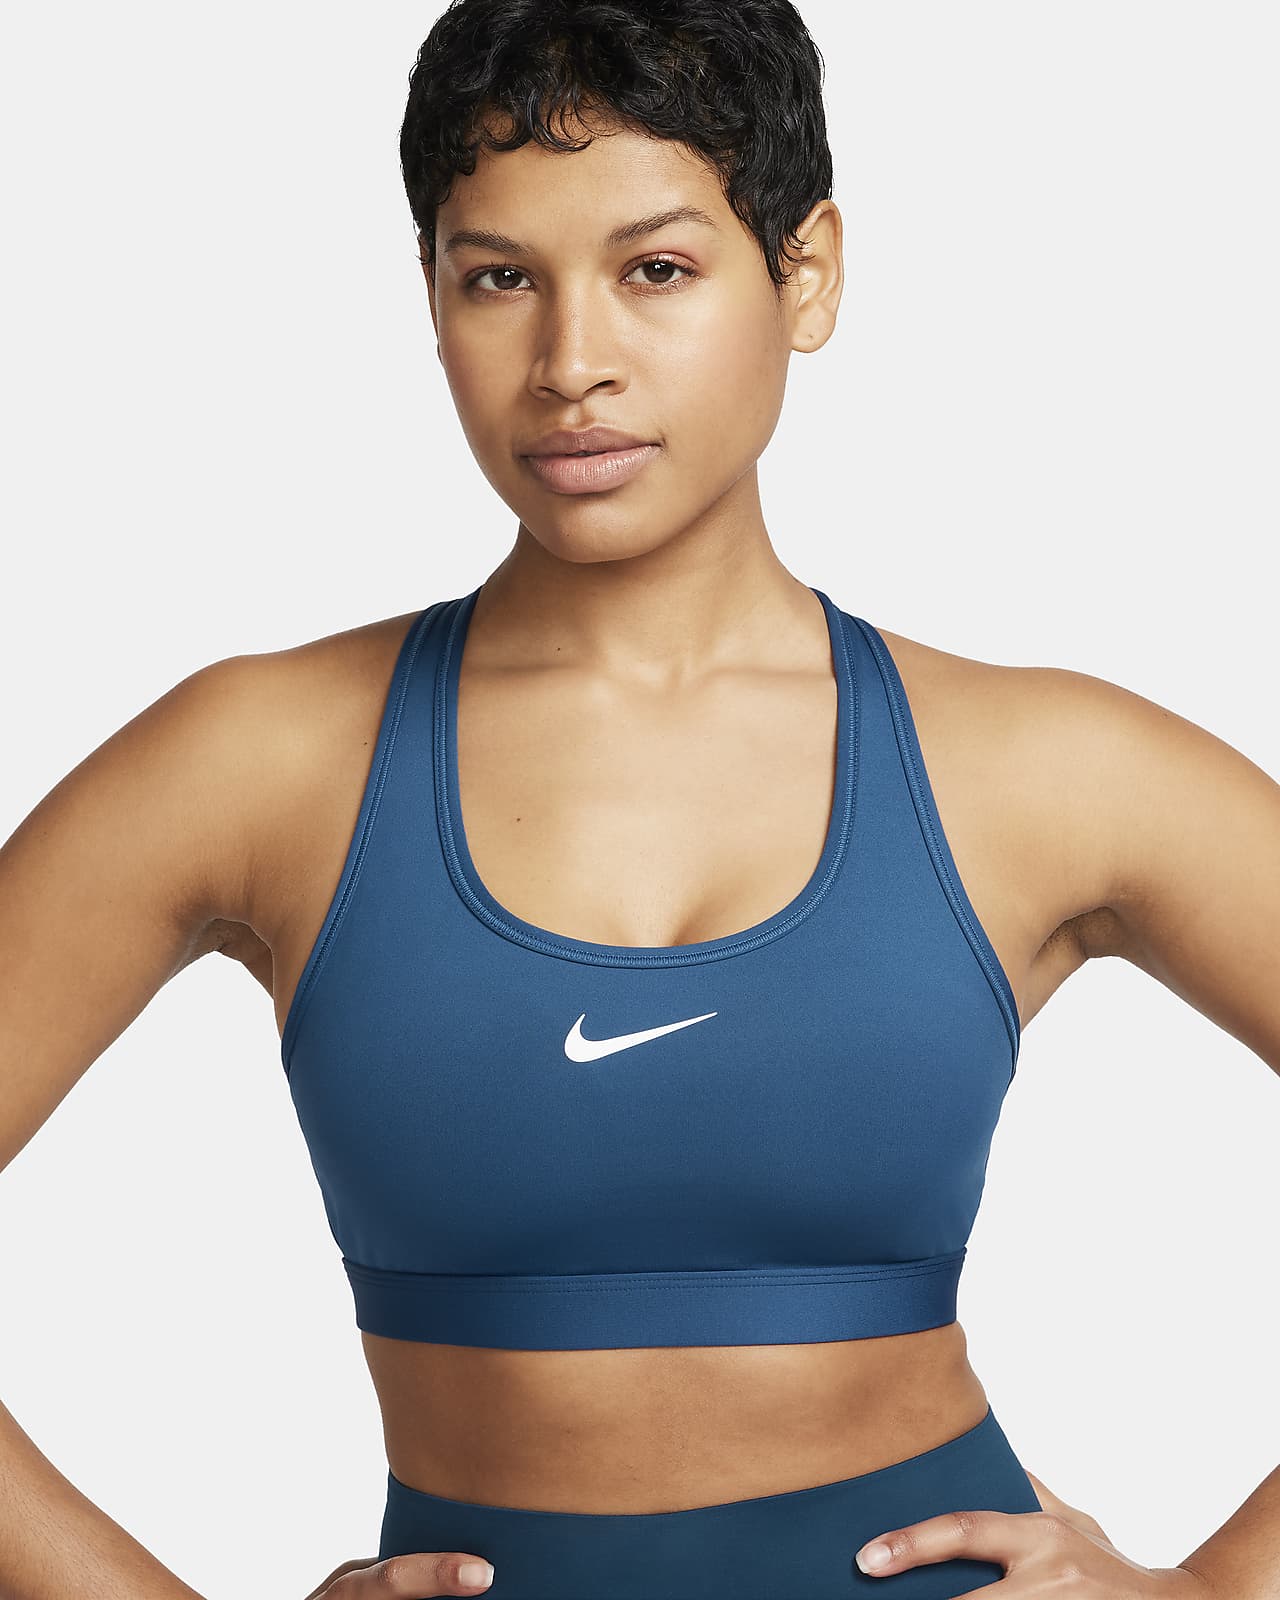 https://static.nike.com/a/images/t_PDP_1280_v1/f_auto,q_auto:eco/91964456-016e-4f6e-b06d-674fa5eaa12b/brassiere-de-sport-rembourree-swoosh-support-pour-cmJk4T.png